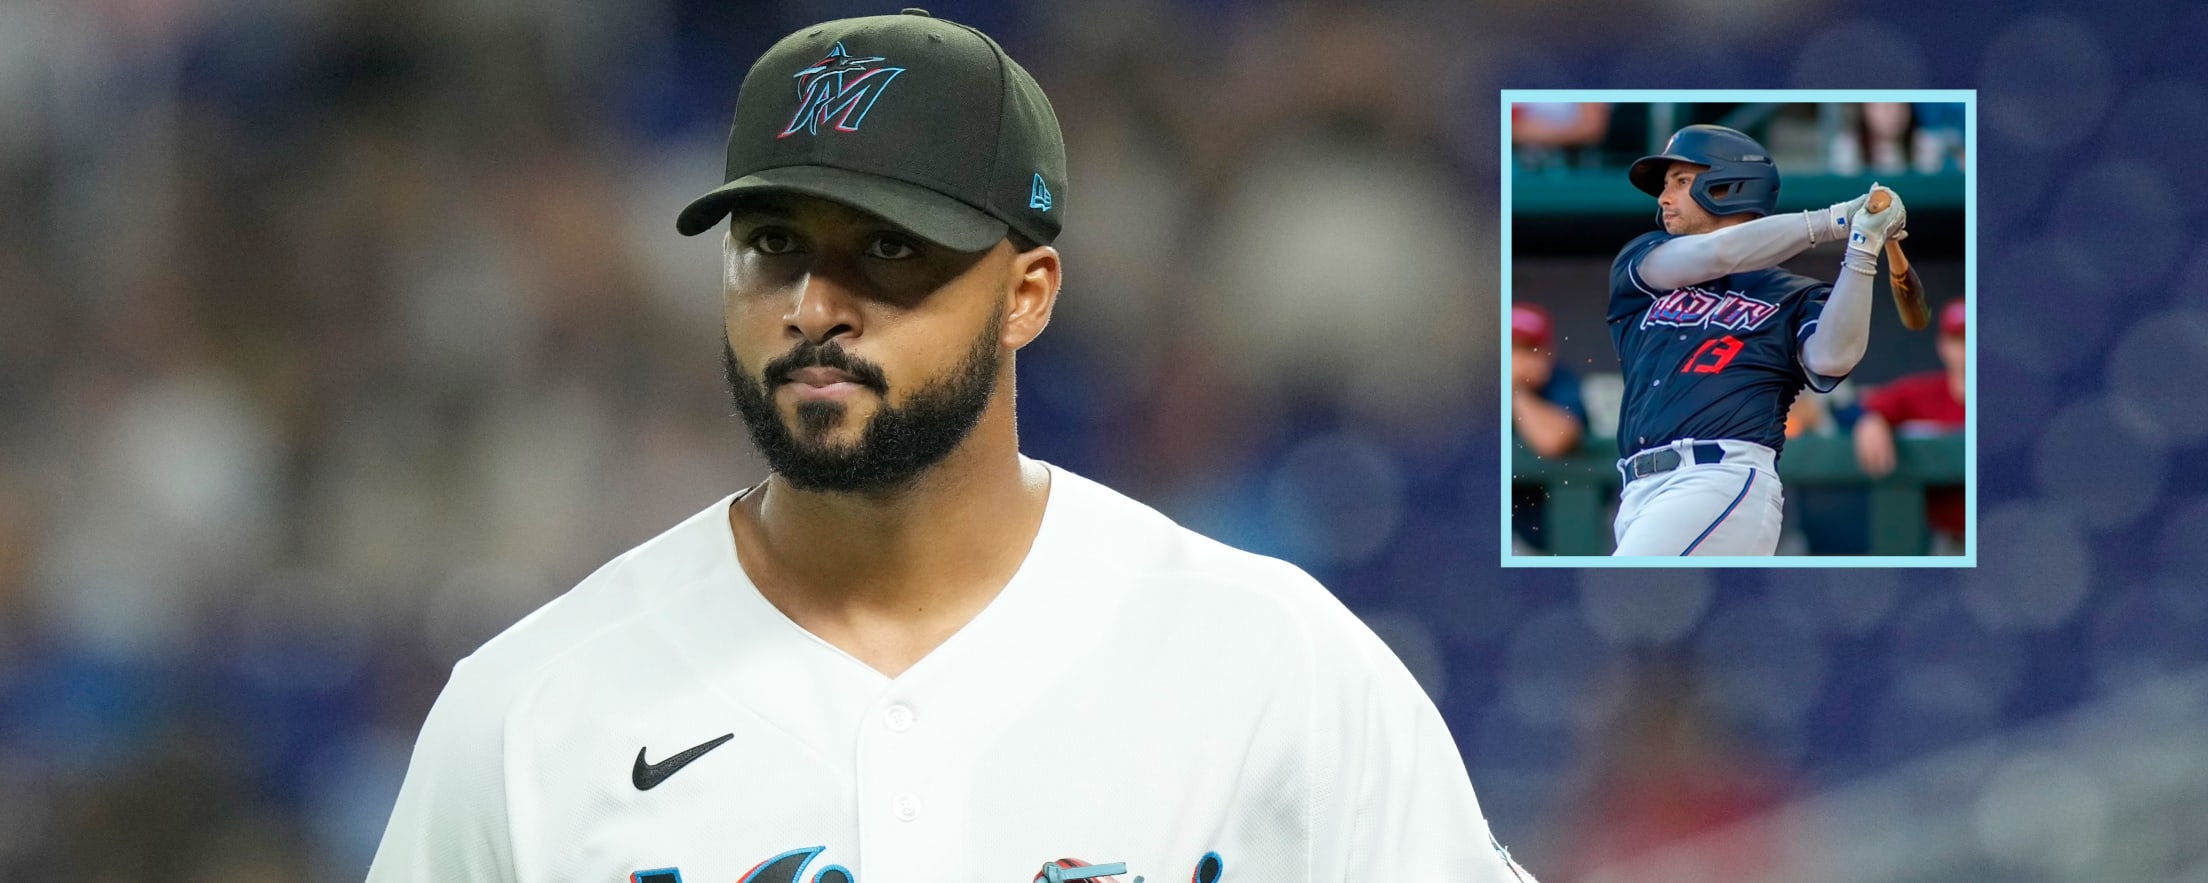 Rangers vs. Marlins MLB 2022 live stream (7/21) How to watch